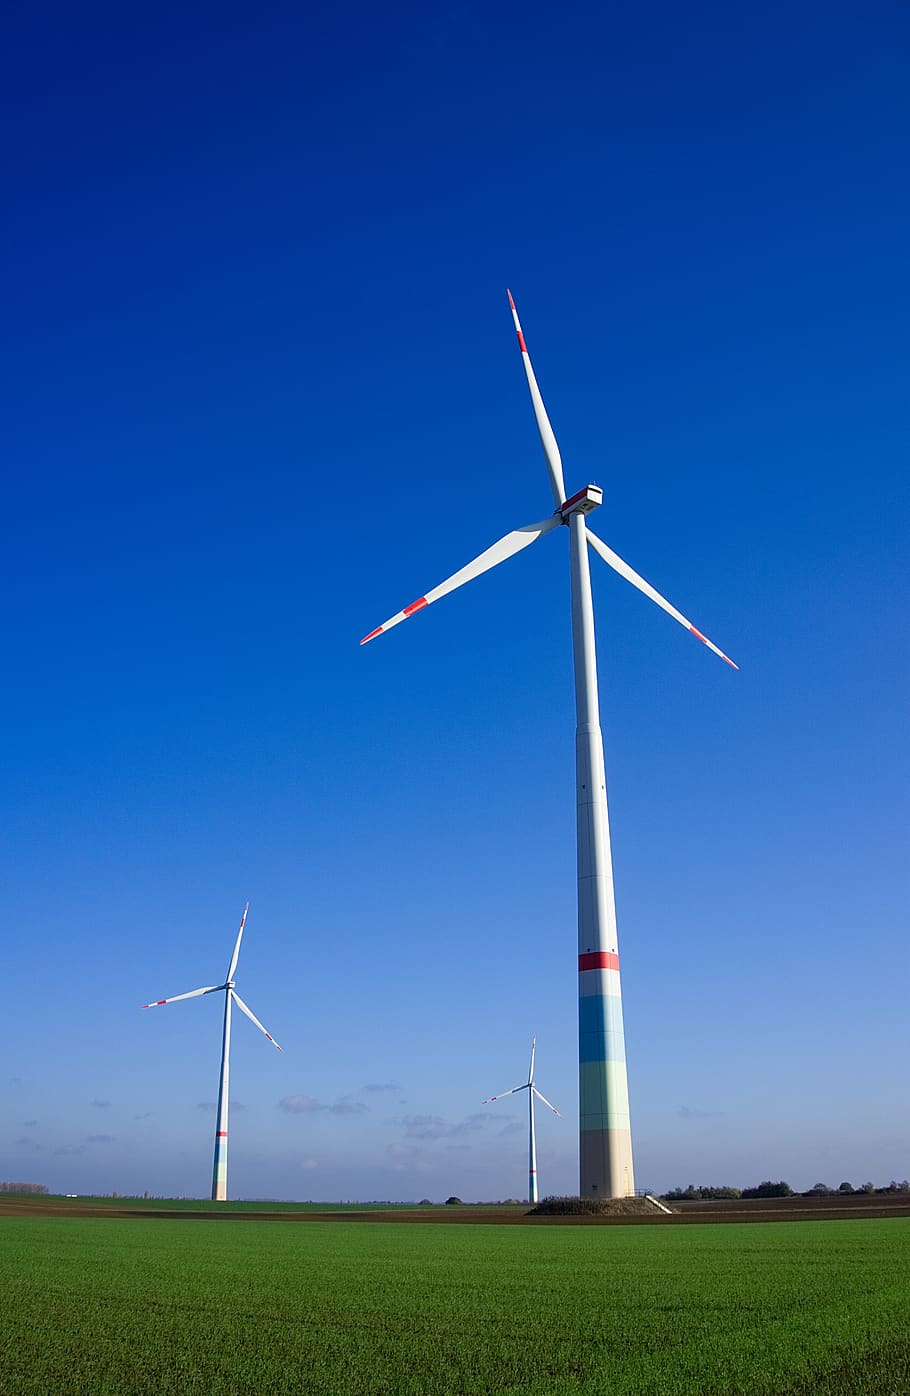 windräder, wind power, energy, blue, environmental technology, rotor, current, turn, power generation, wind energy